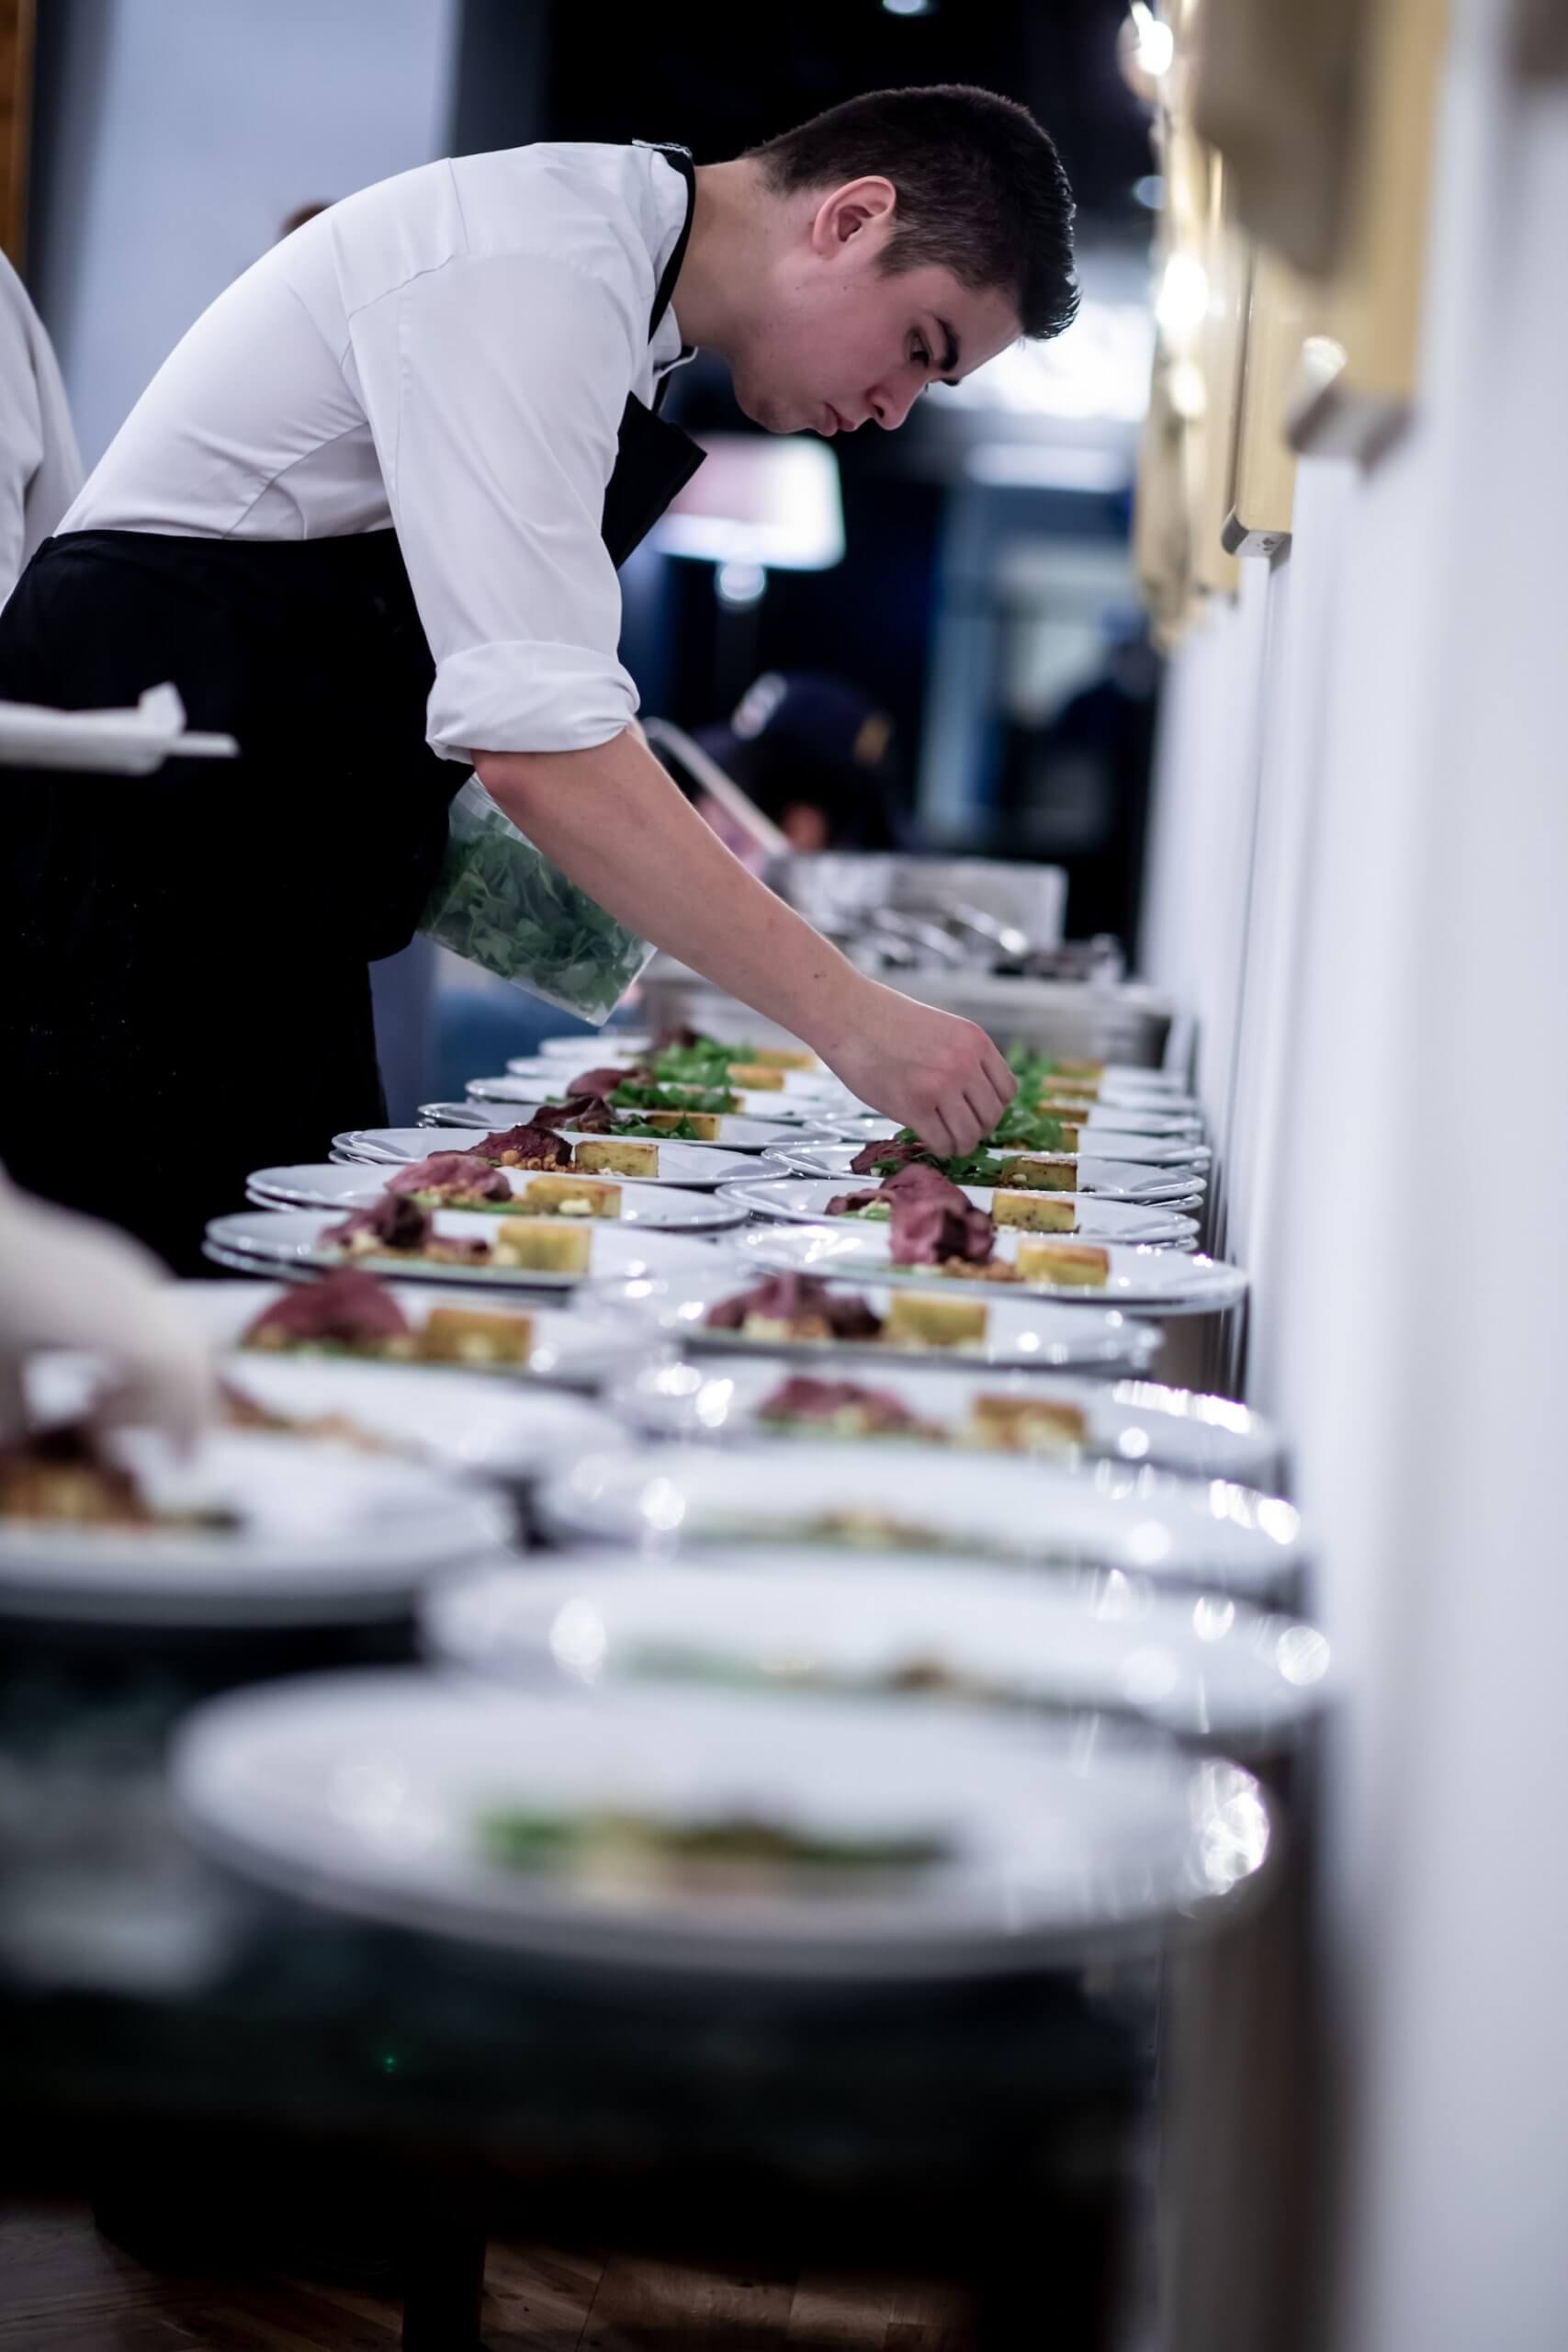 Chef plating food for a business dinner